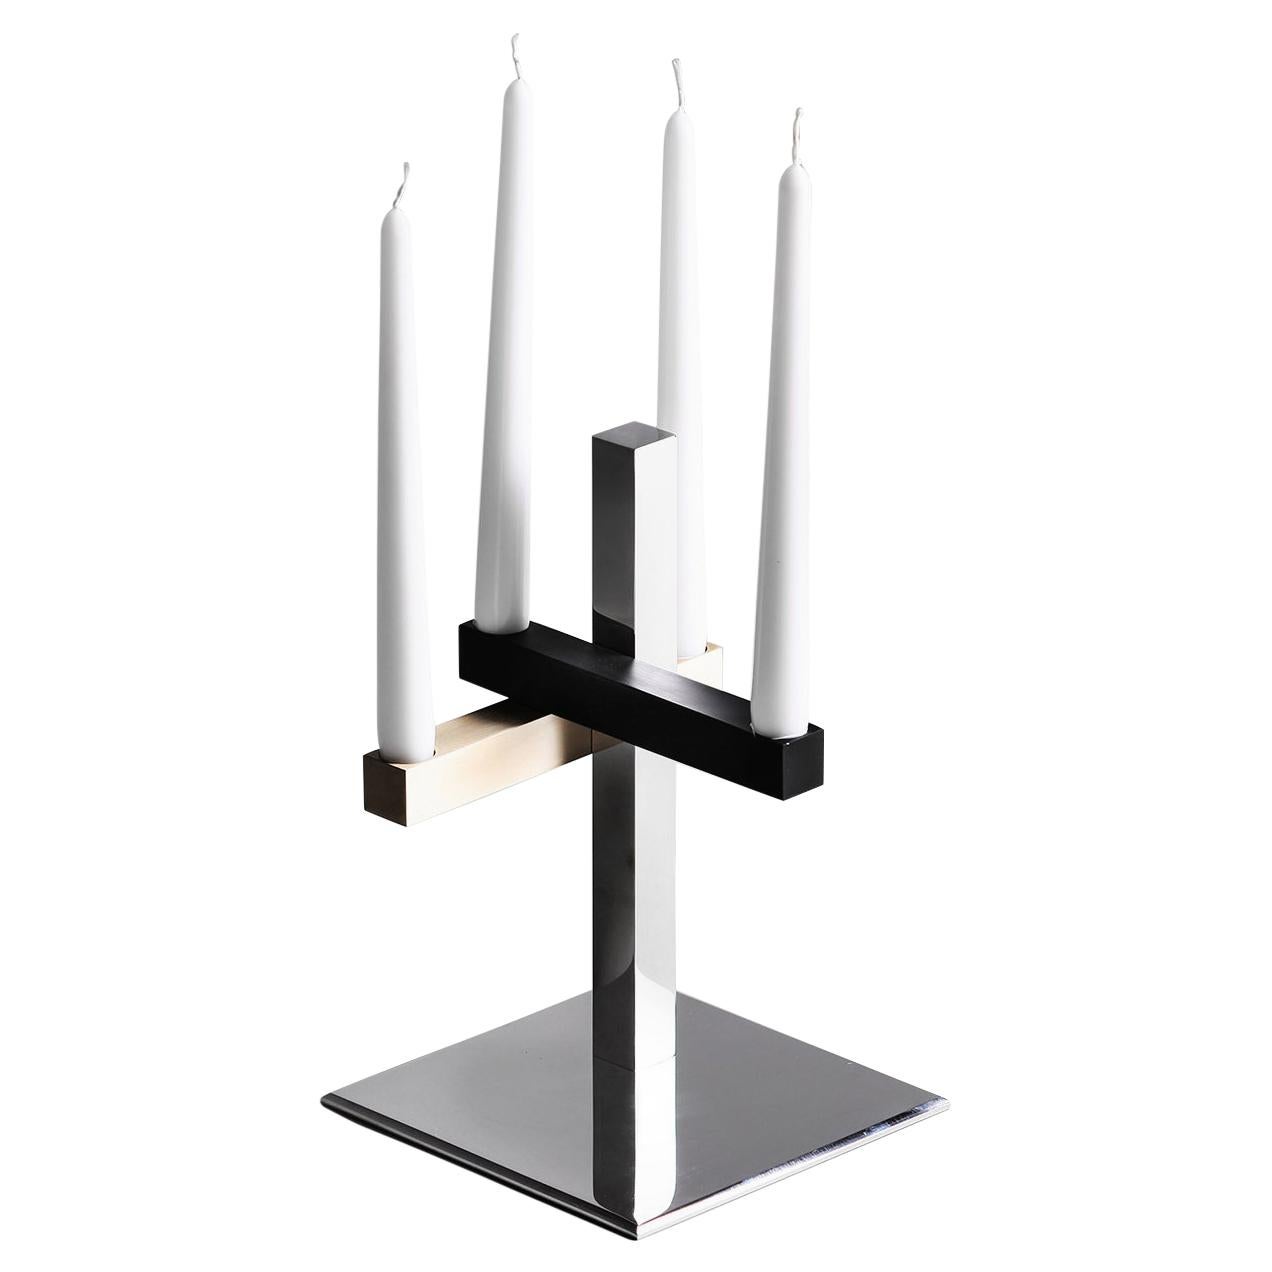 Mikado, Candle Holder from the Mikado Line